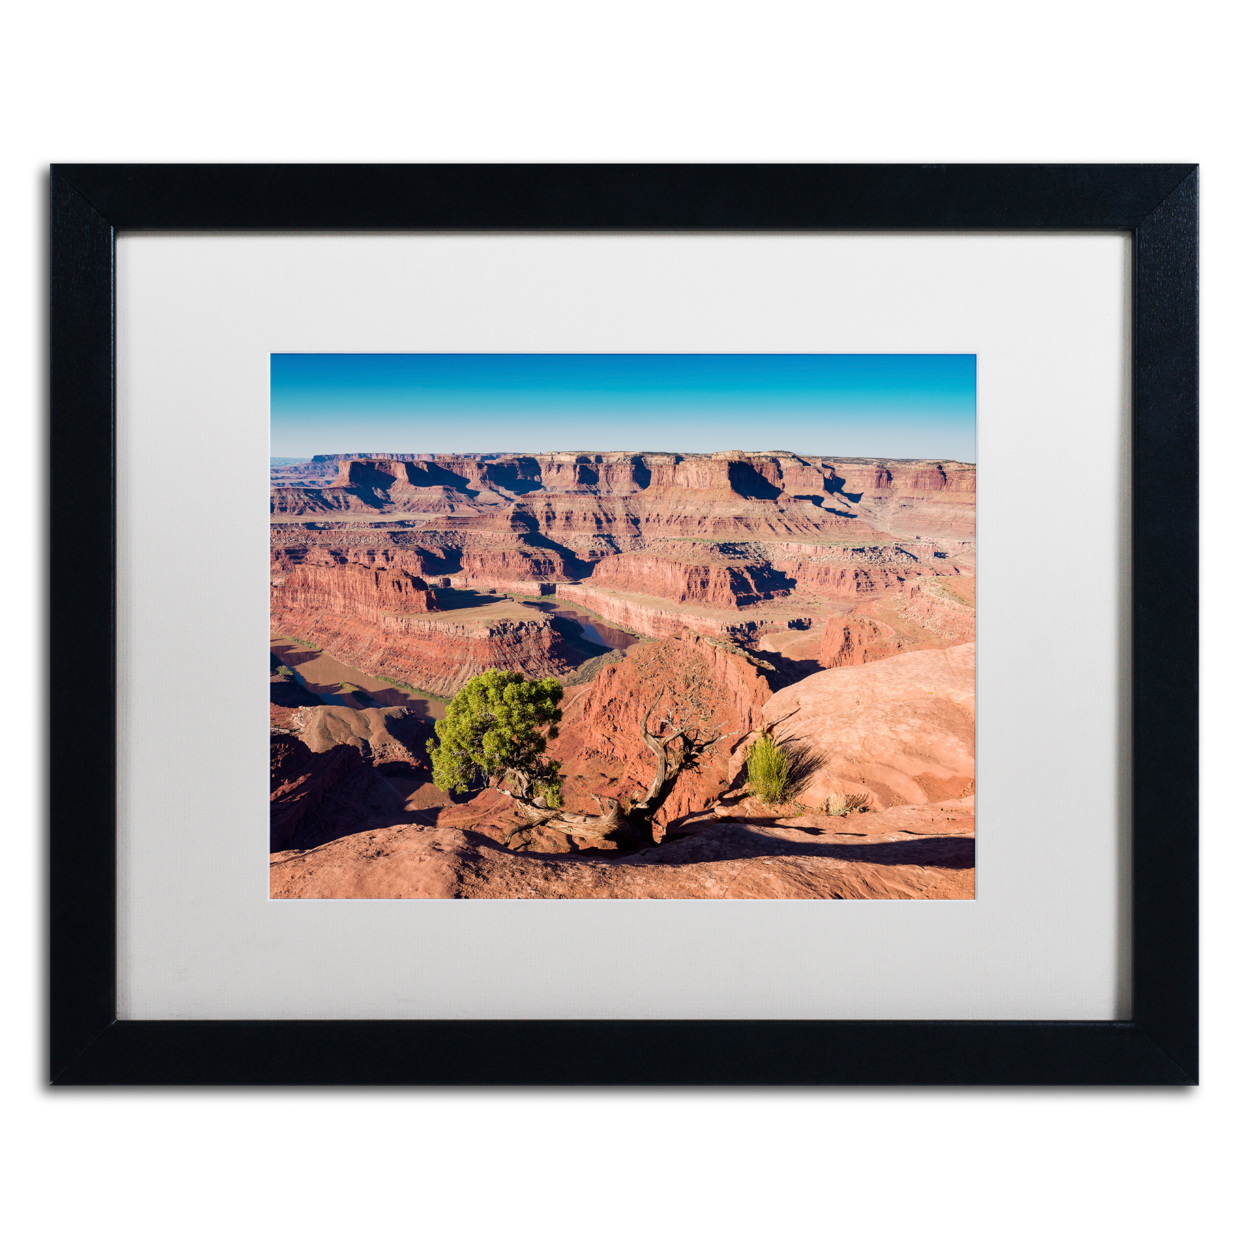 Michael Blanchette Photography 'Canyonlands Sunrise' Black Wooden Framed Art 18 X 22 Inches